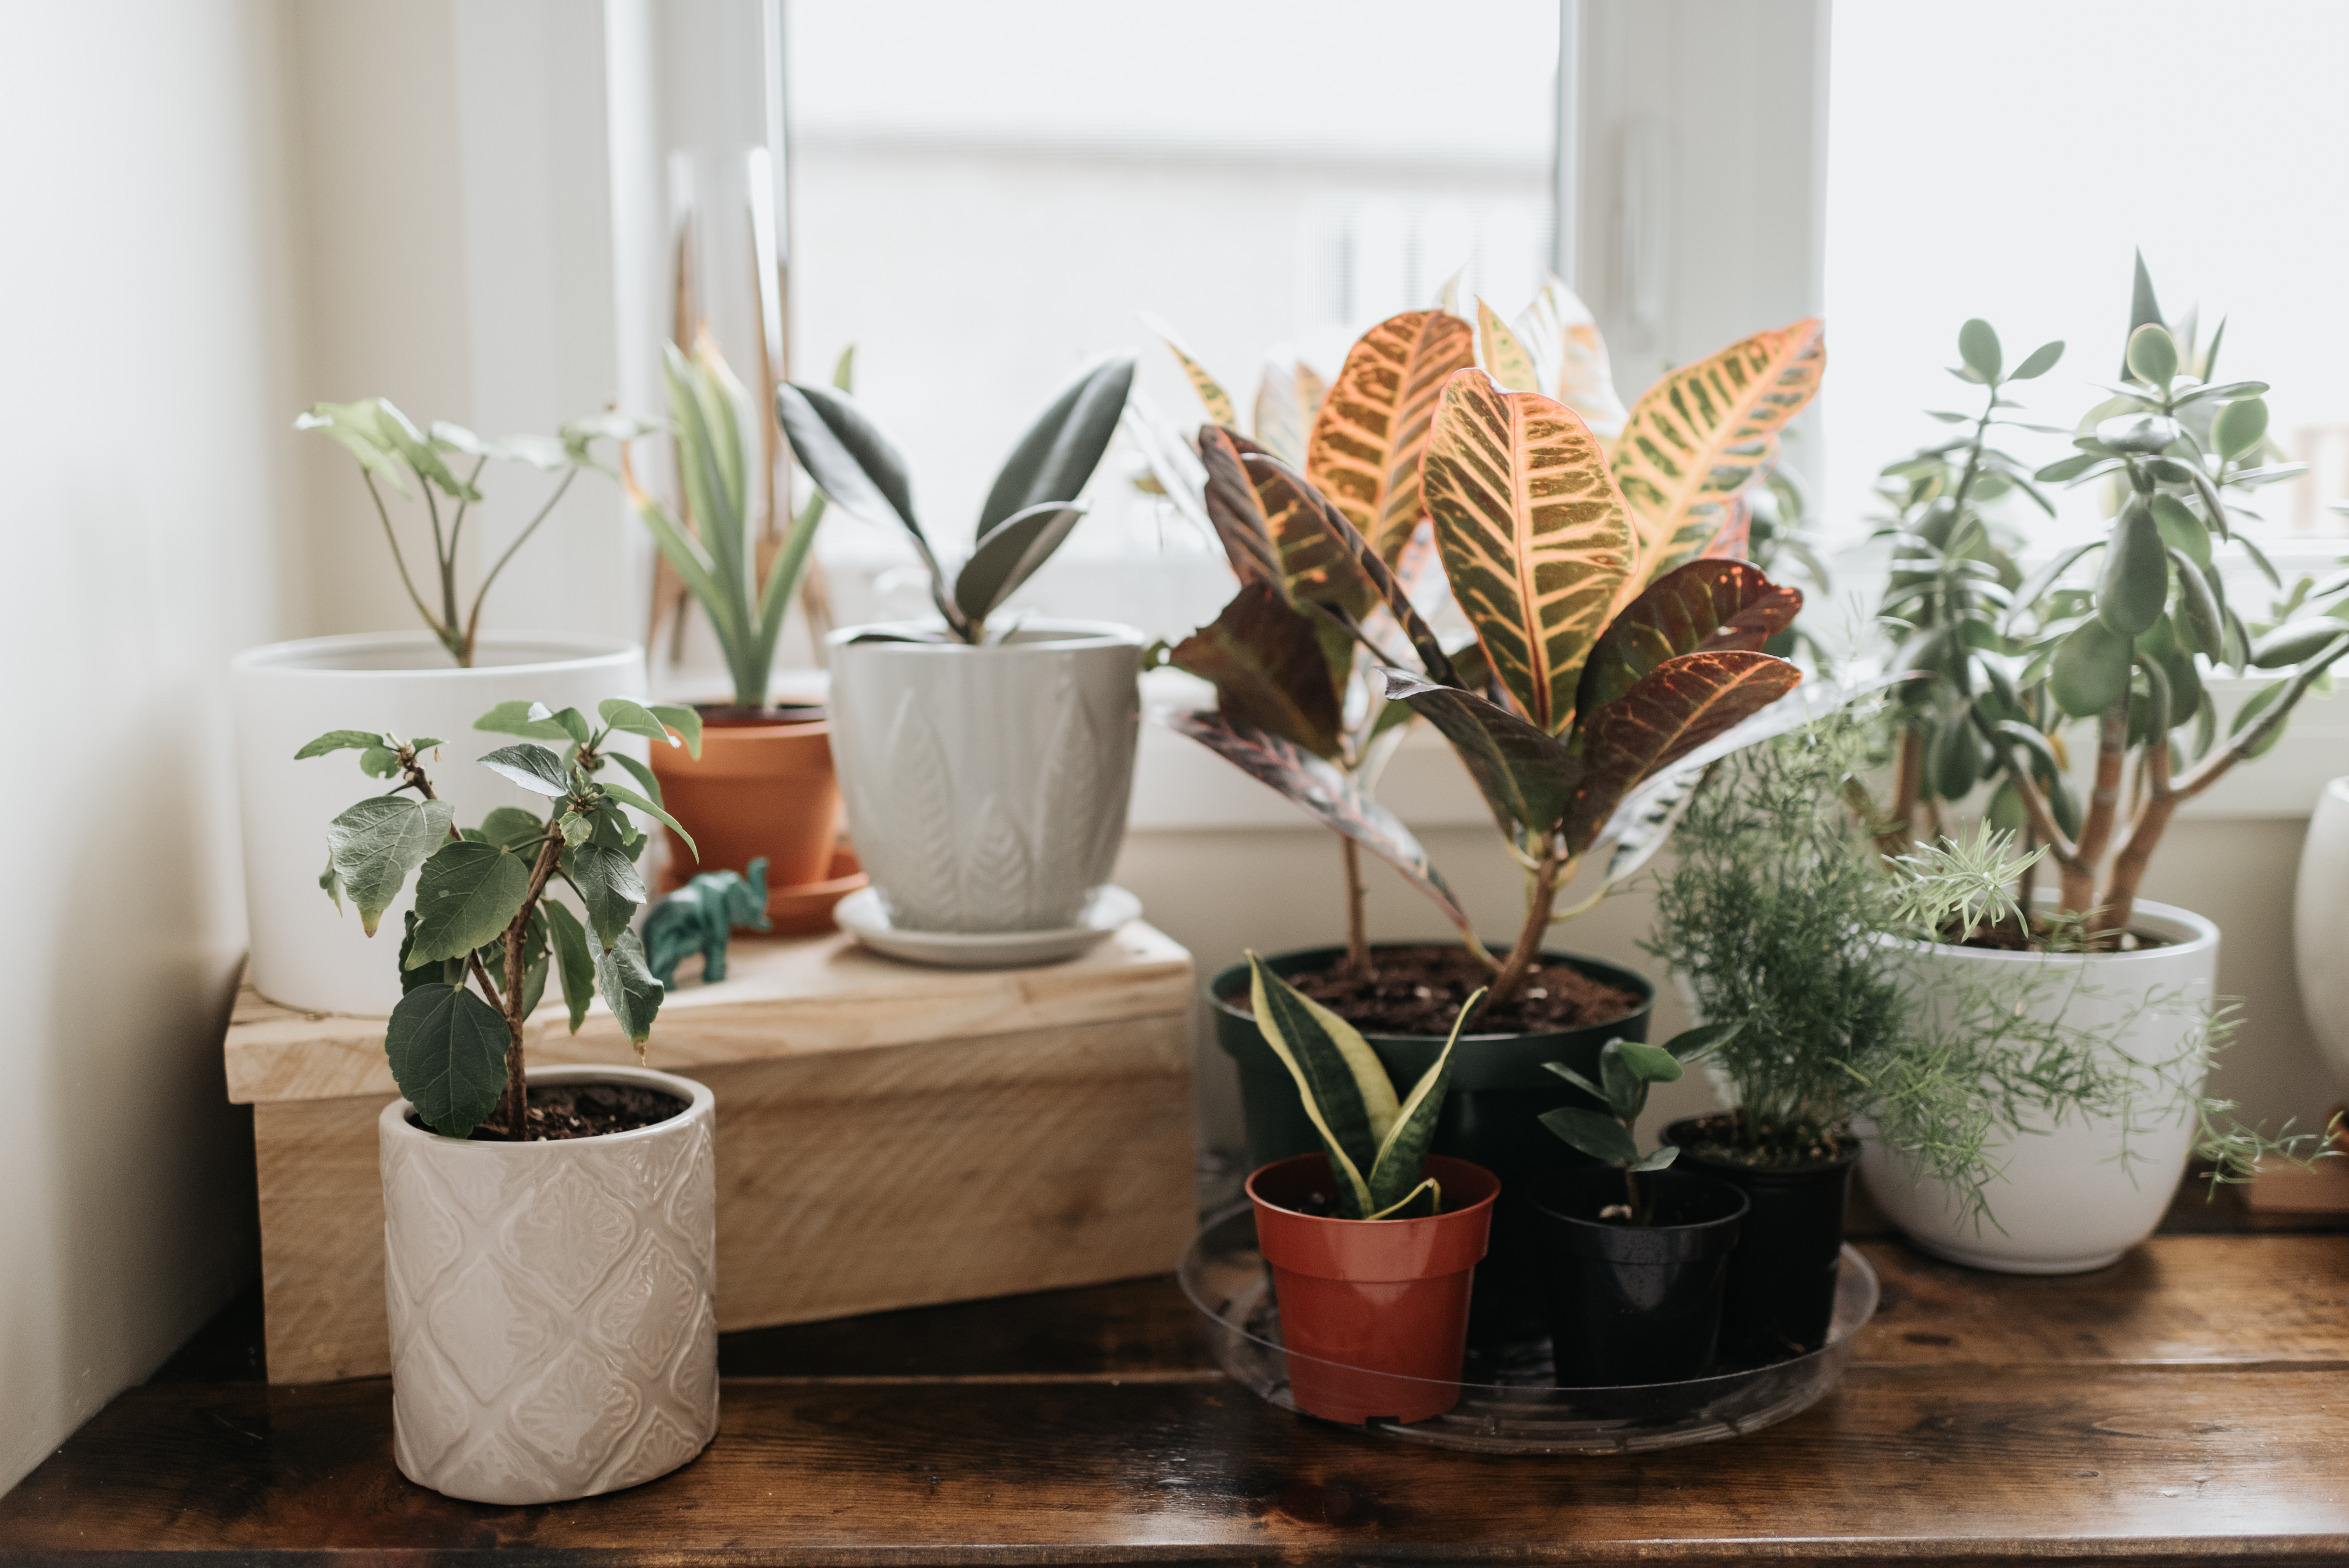 How to Choose a Container for Your Houseplant